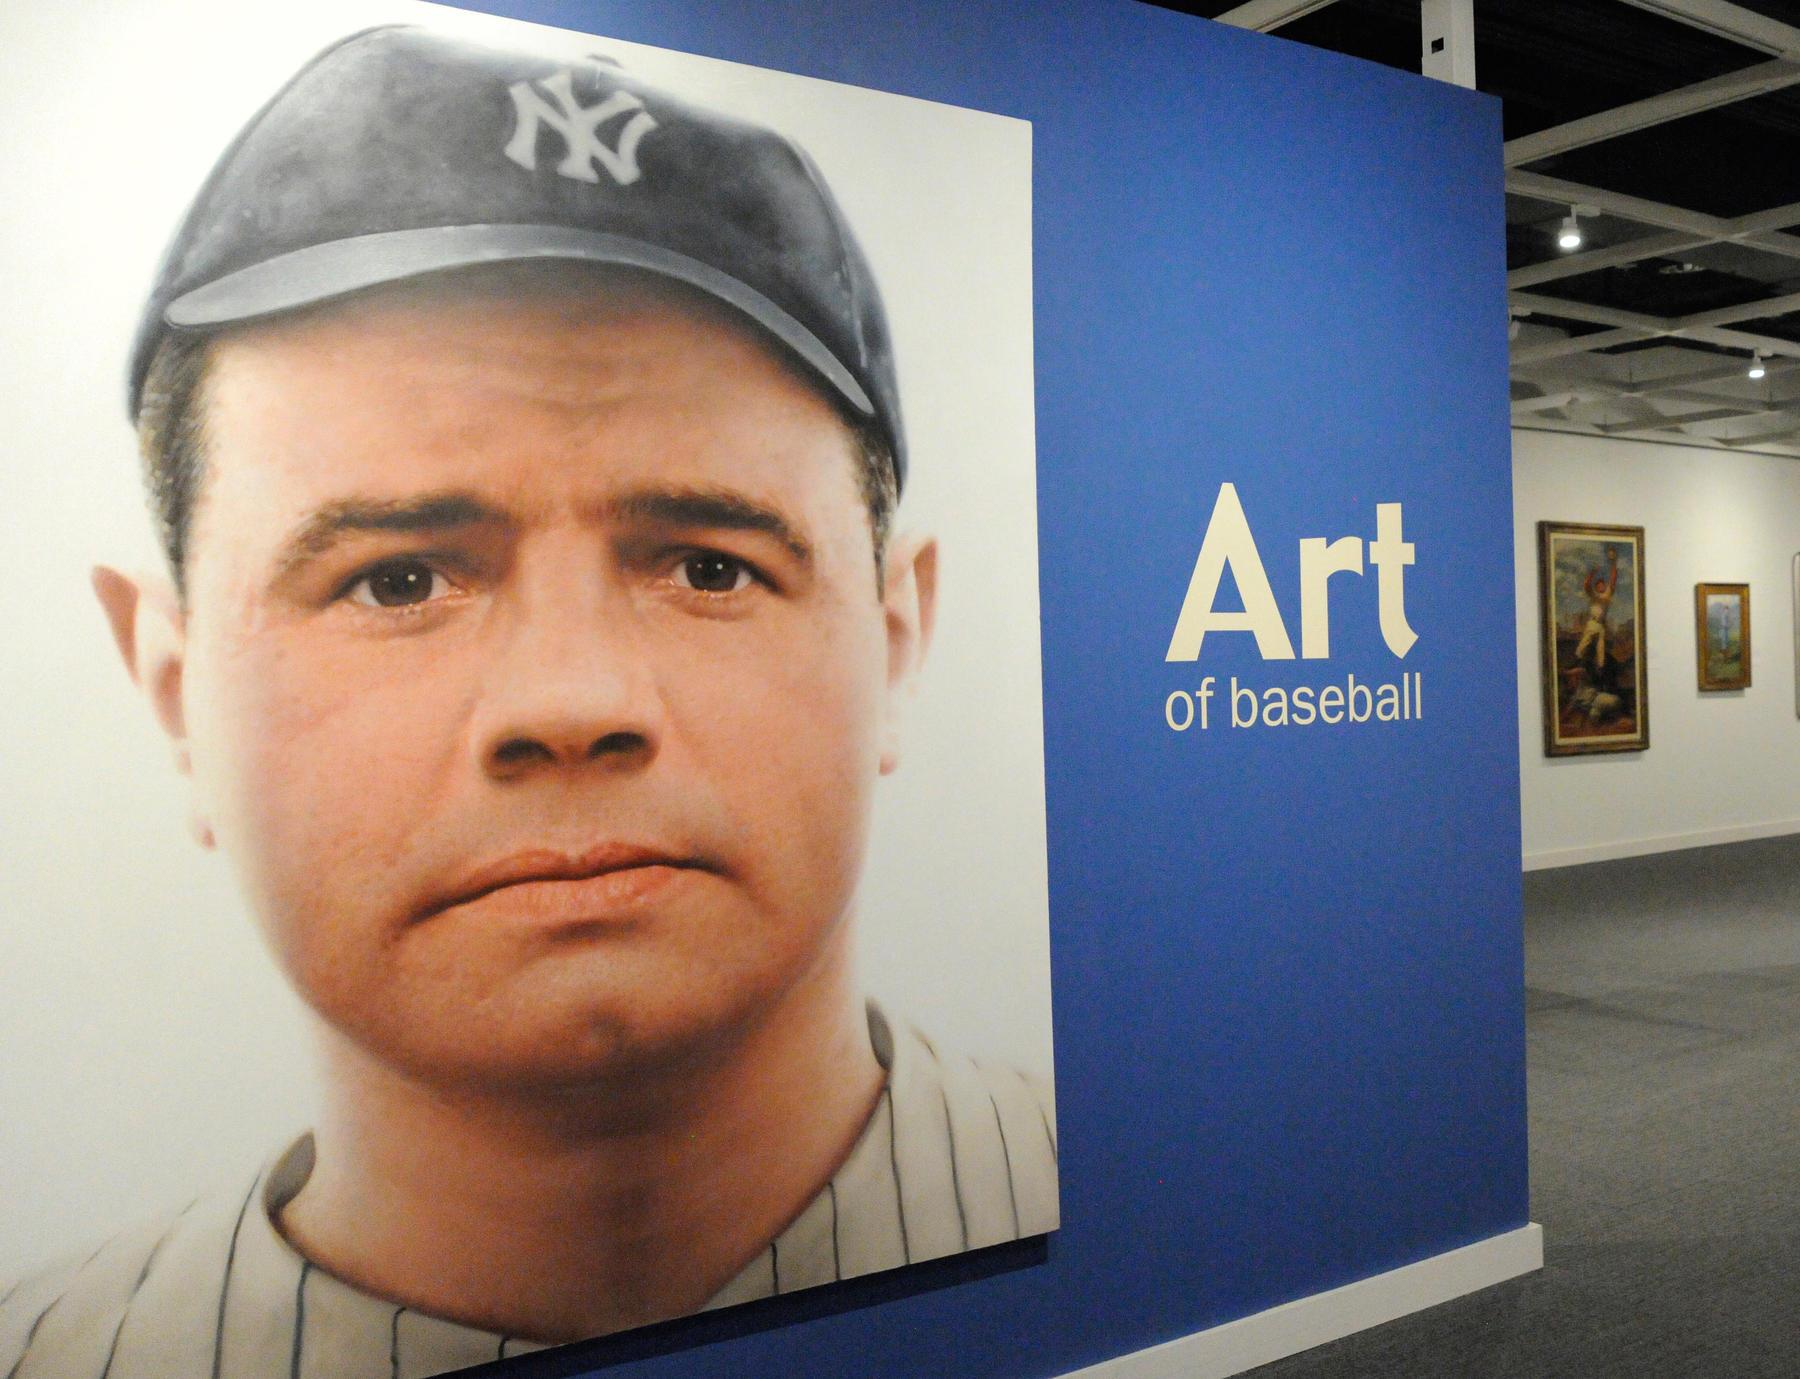 Babe Ruth Portrait featured in The National Baseball Hall of Fame